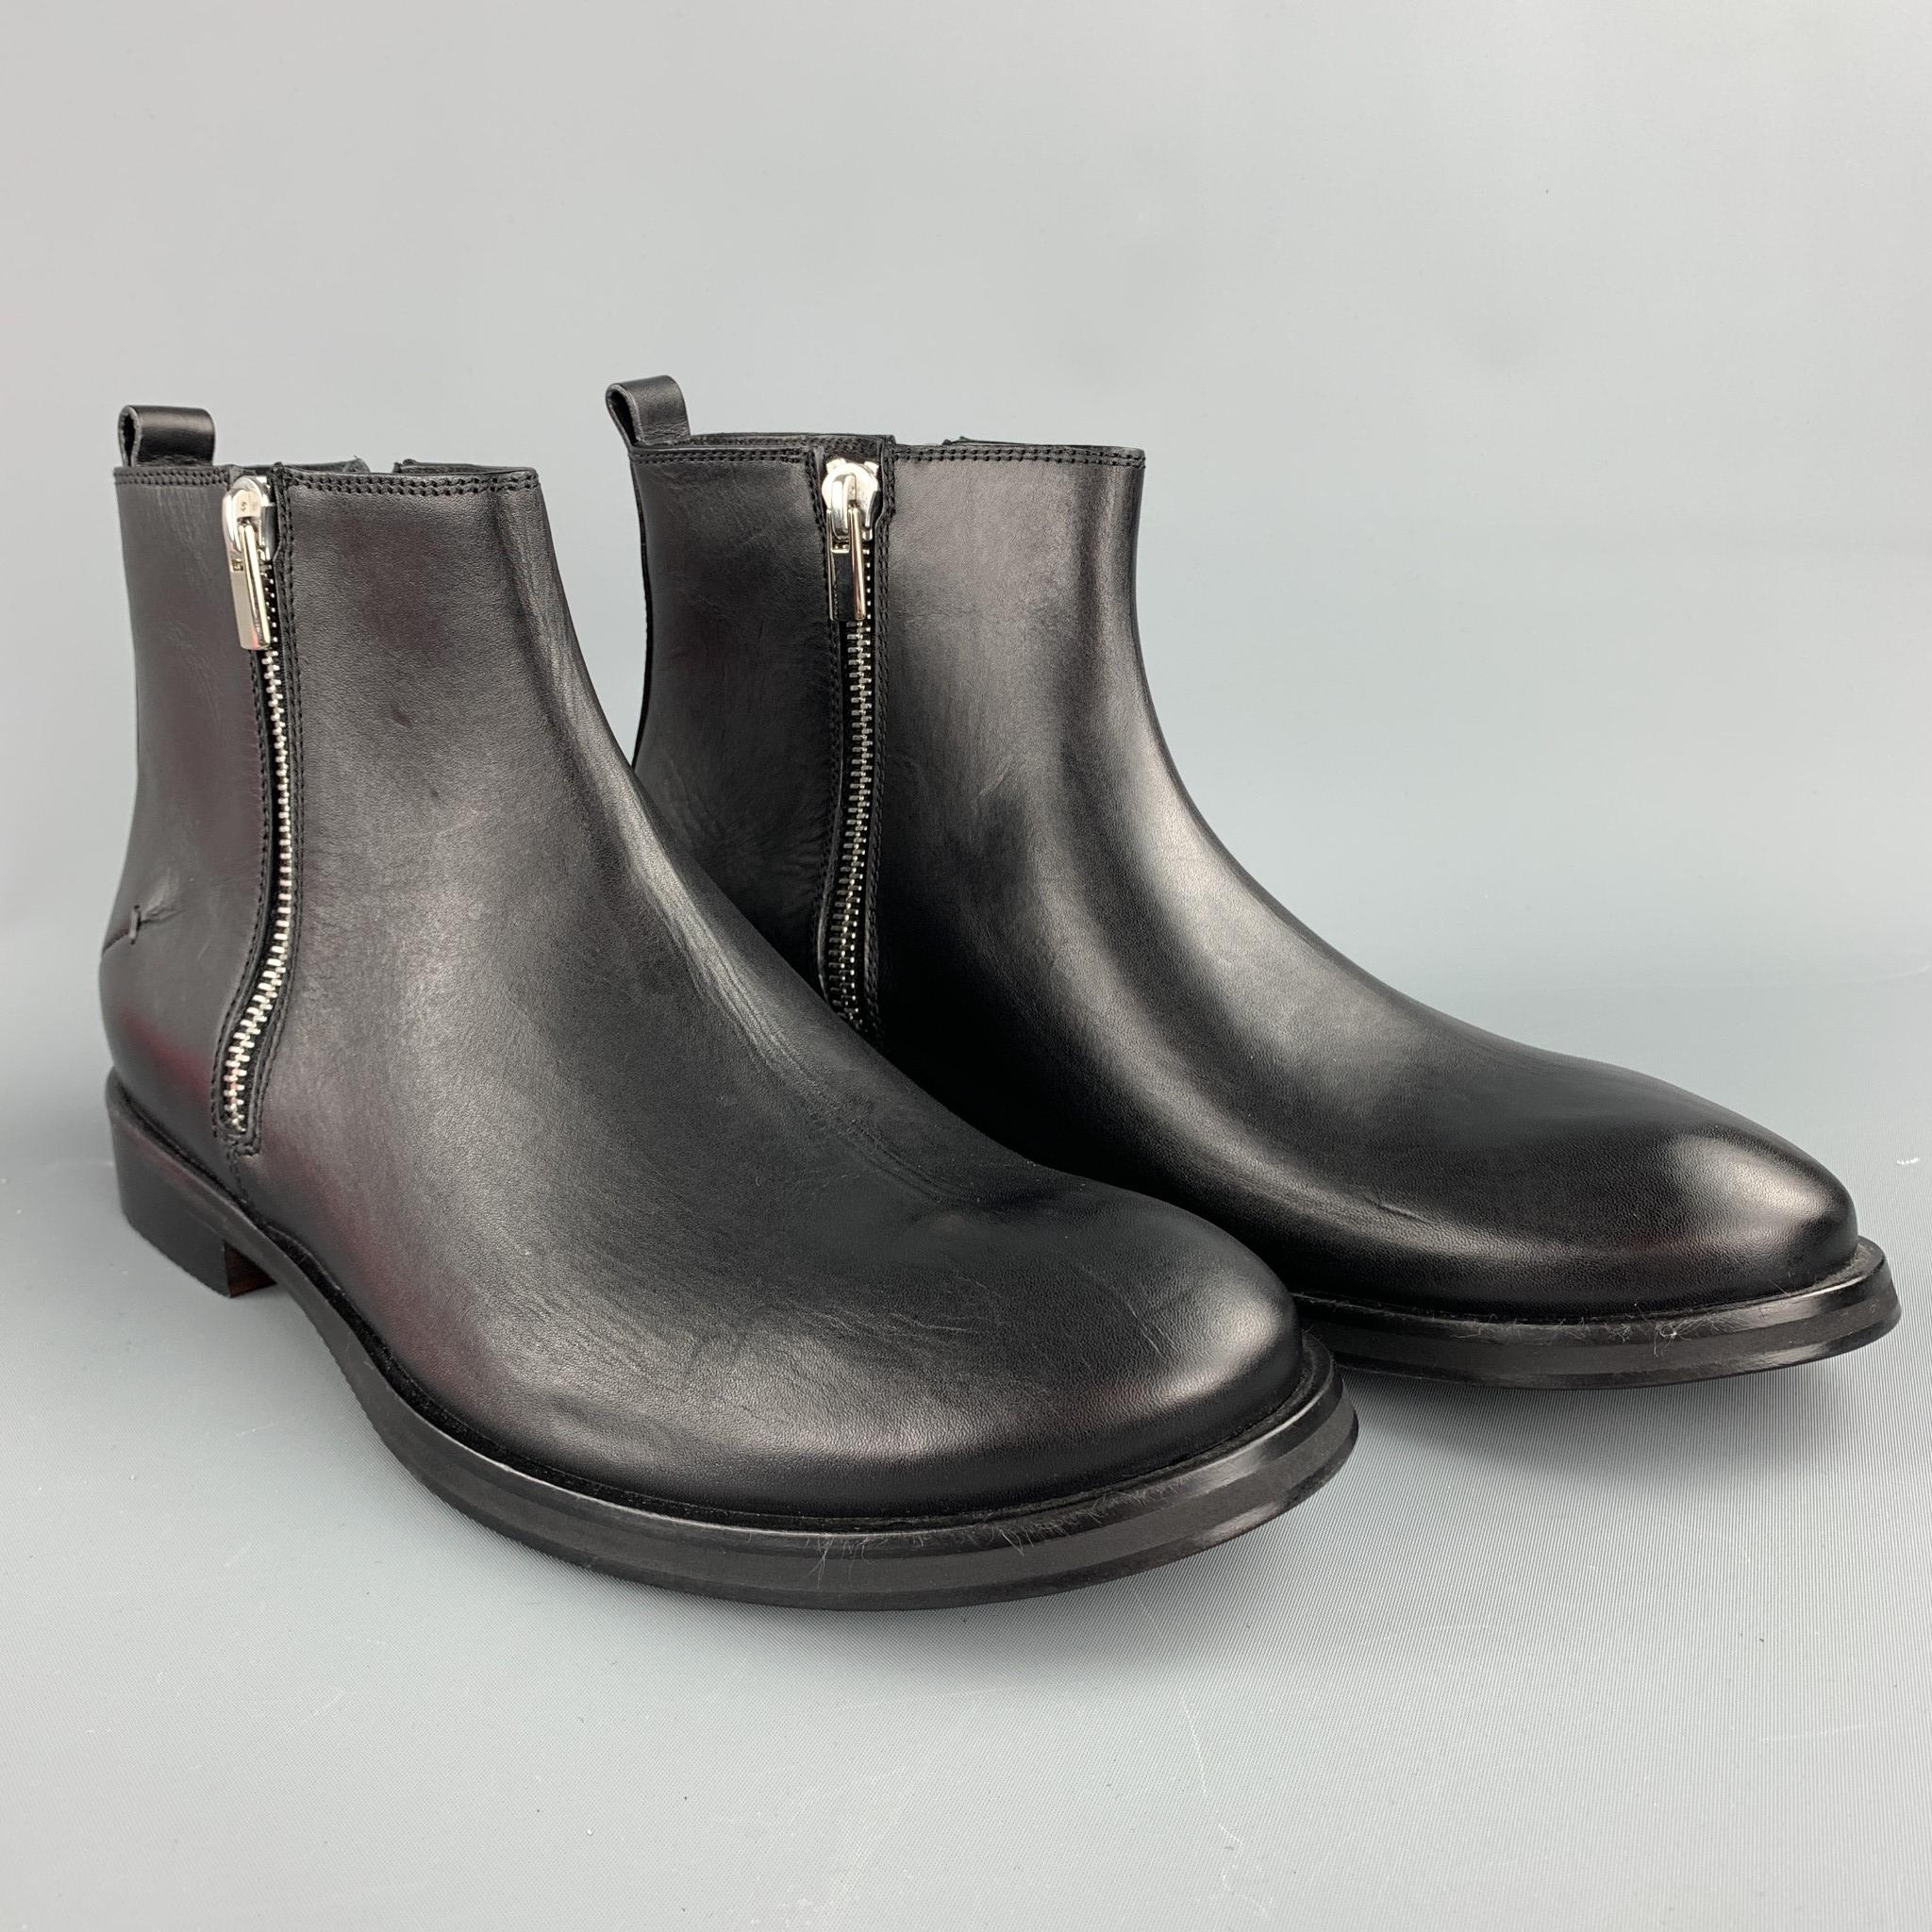 CoSTUME NATIONAL ankle boots comes in a black leather featuring a double zipper closure and a wood grain sole. Made in Italy. 

Brand New. 
Marked:

Measurements:

Length: 12.5 in. 
Width: 4.5 in. 
Height: 6.5 in. 